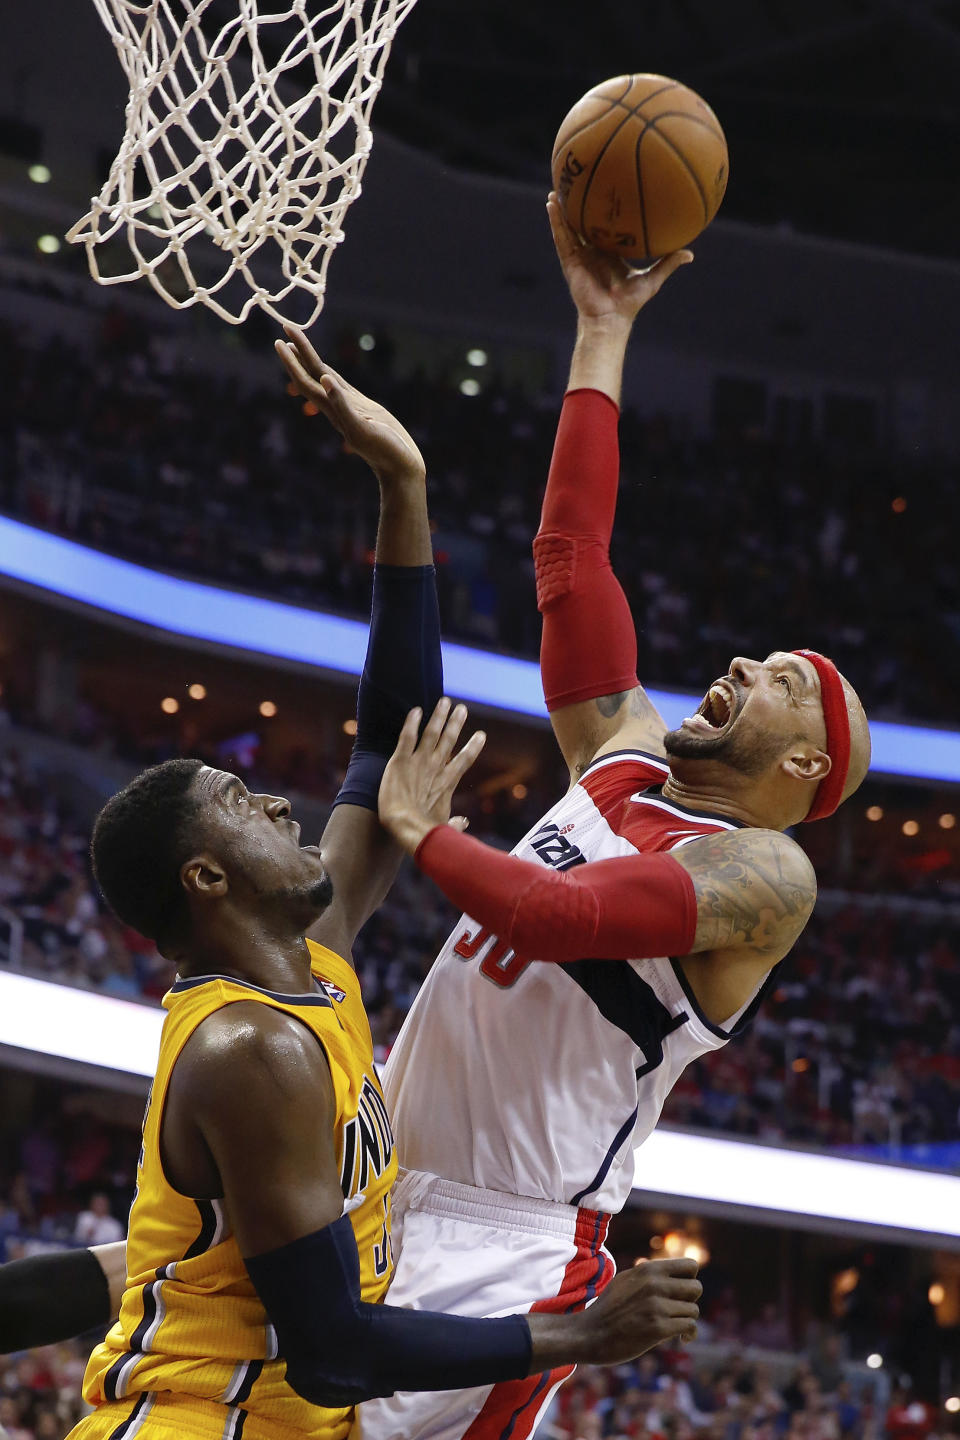 Washington Wizards forward Drew Gooden , right, shoots past Indiana Pacers center Roy Hibbert during the first half of Game 4 of an Eastern Conference semifinal NBA basketball playoff game in Washington, Sunday, May 11, 2014. (AP Photo/Alex Brandon)